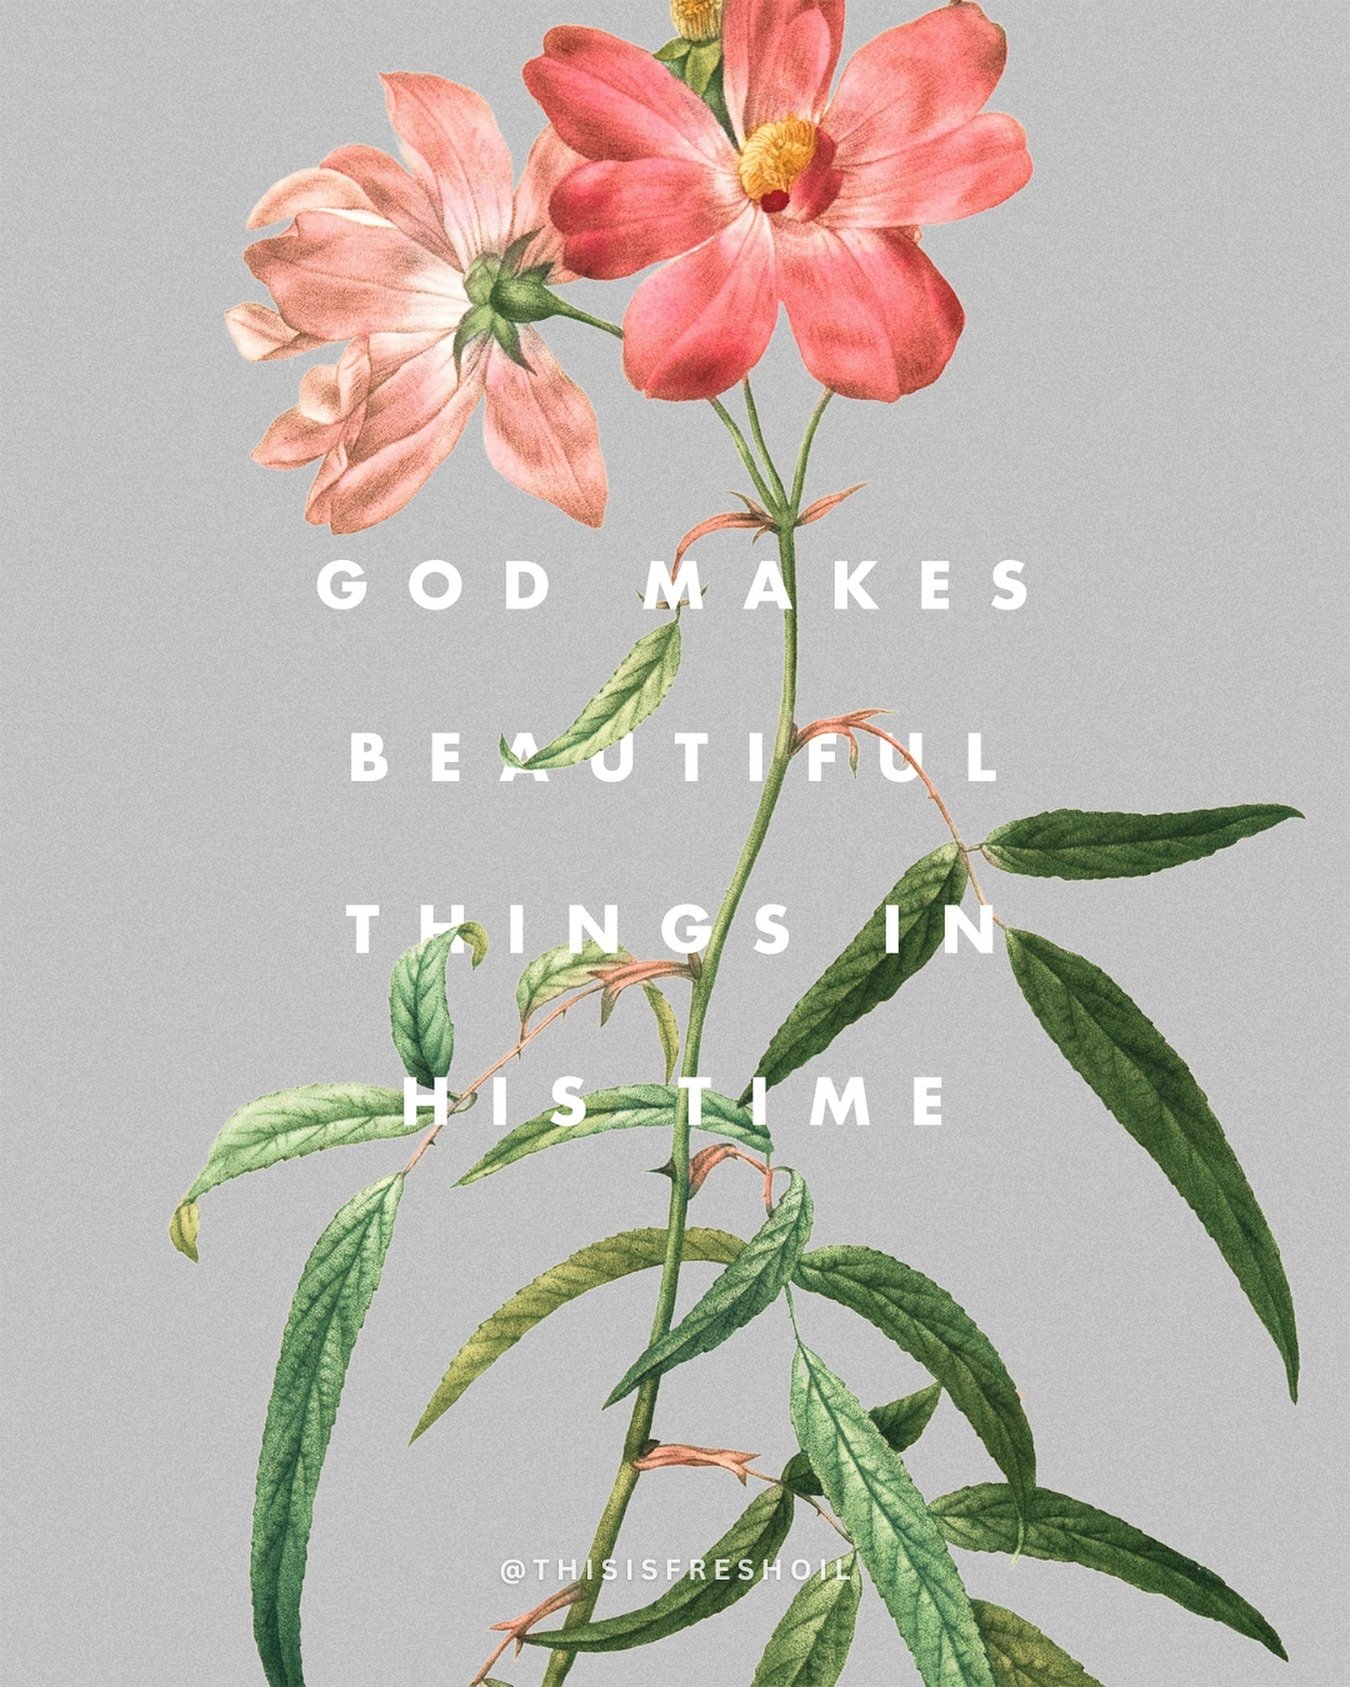 God makes everything beautiful in its time. Trust His timing, for He weaves all things perfectly ✨

#ThisFreshOil